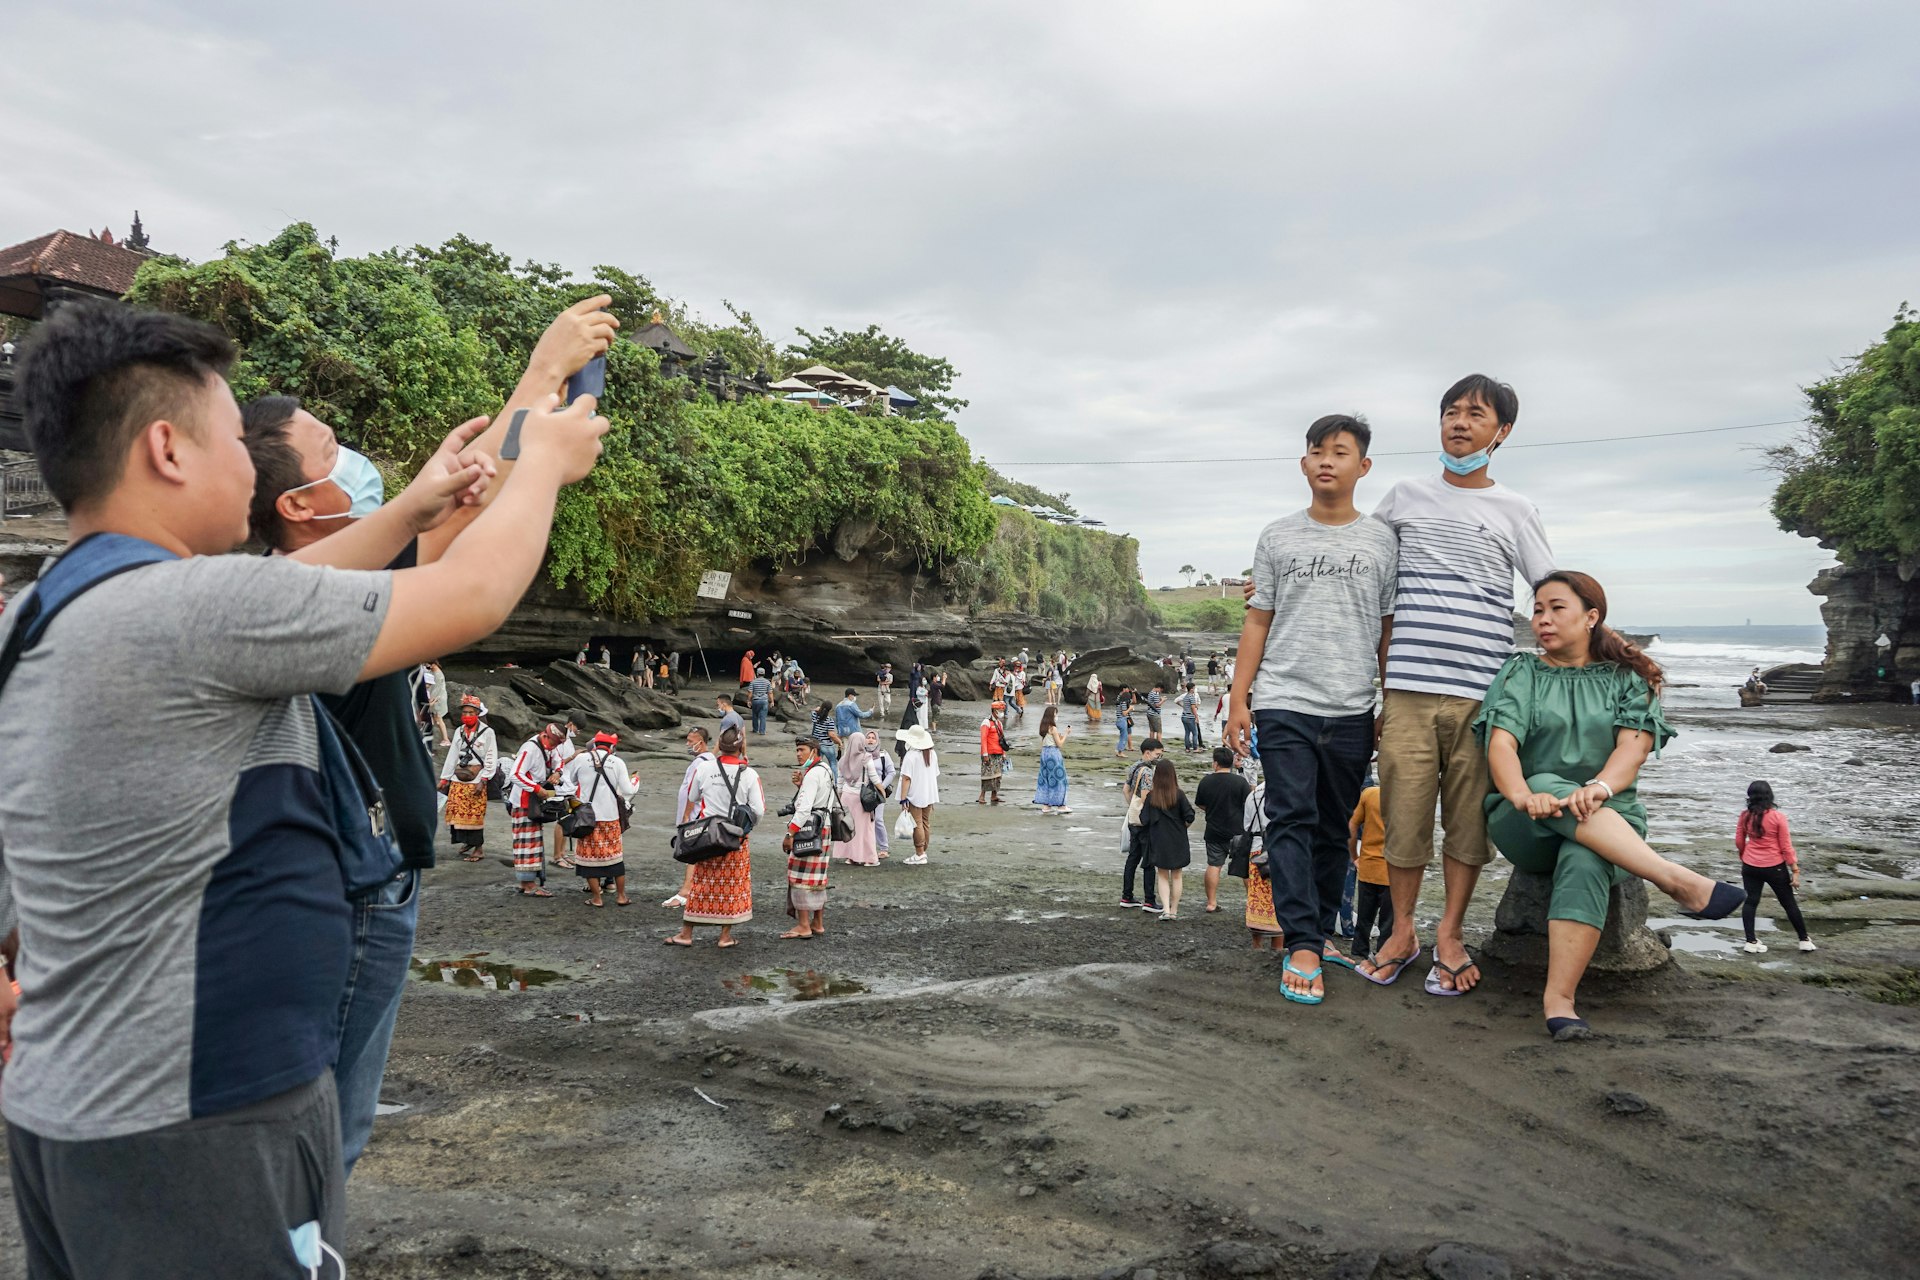 A family takes photographs with the background of the Tanah Lot temple, Tabanan, Bali, Indonesia